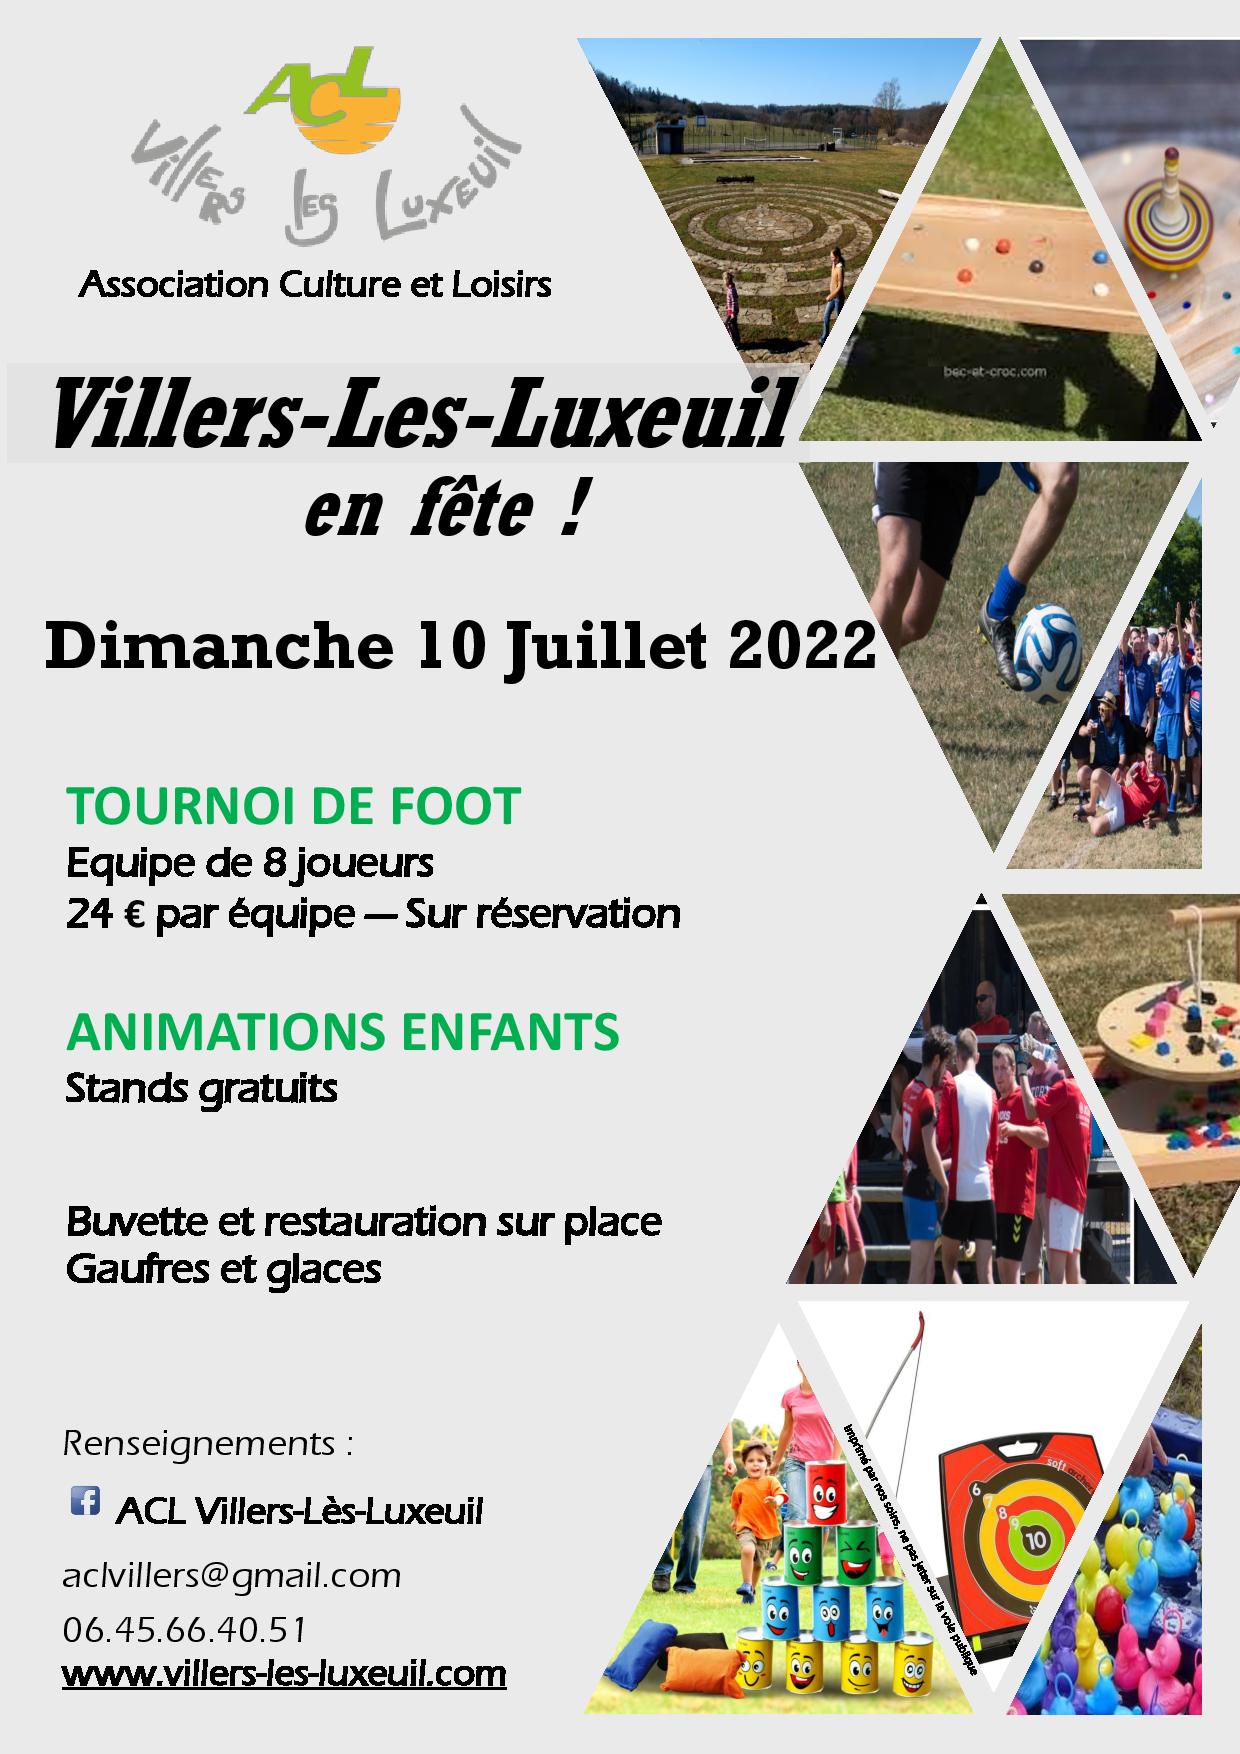 https://www.villers-les-luxeuil.com/projets/villers/files/images/2022_Evenements/07_10_juillet_VF/Tract_VF_2022.jpg